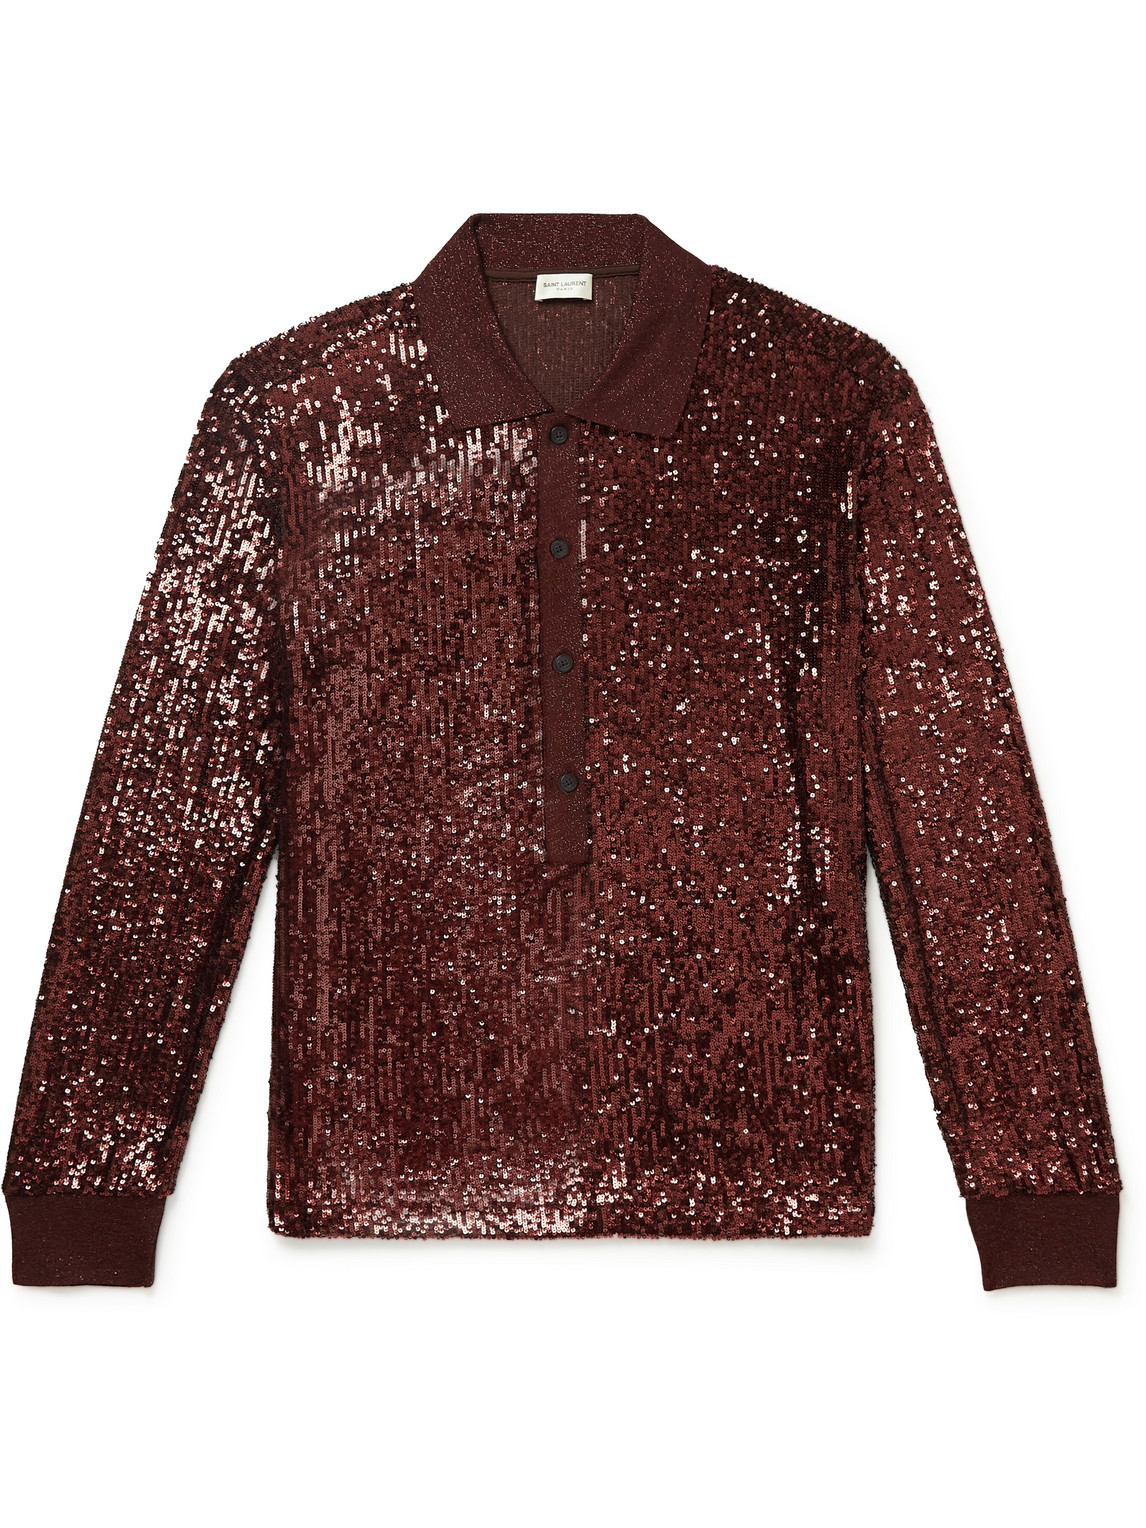 SAINT LAURENT SEQUINNED STRETCH-KNIT POLO SHIRT